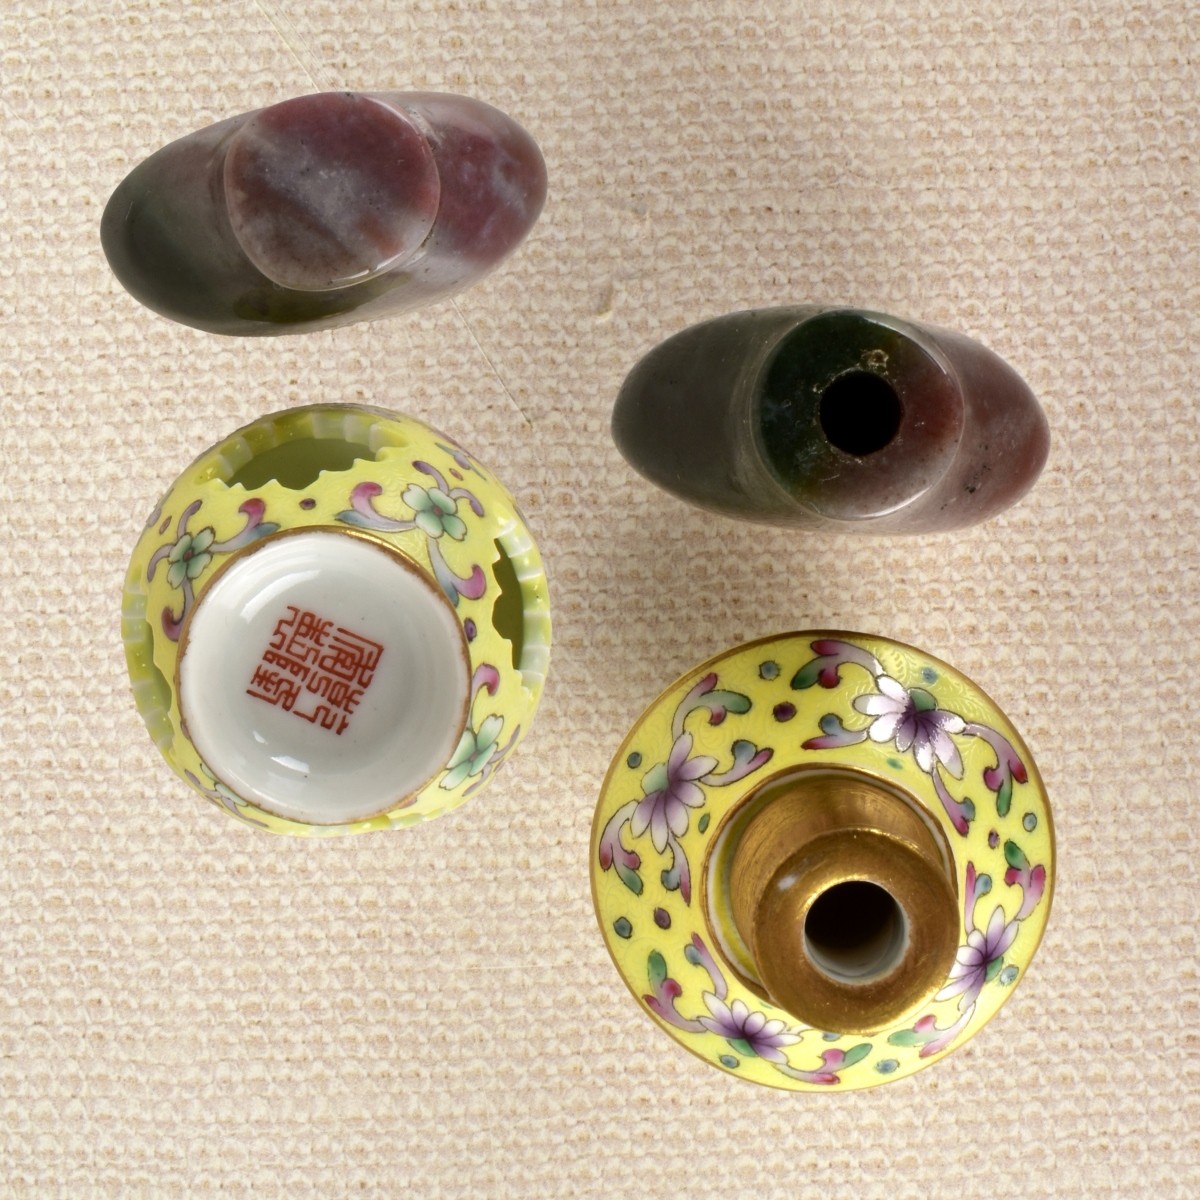 Two (2) Chinese Snuff Bottles